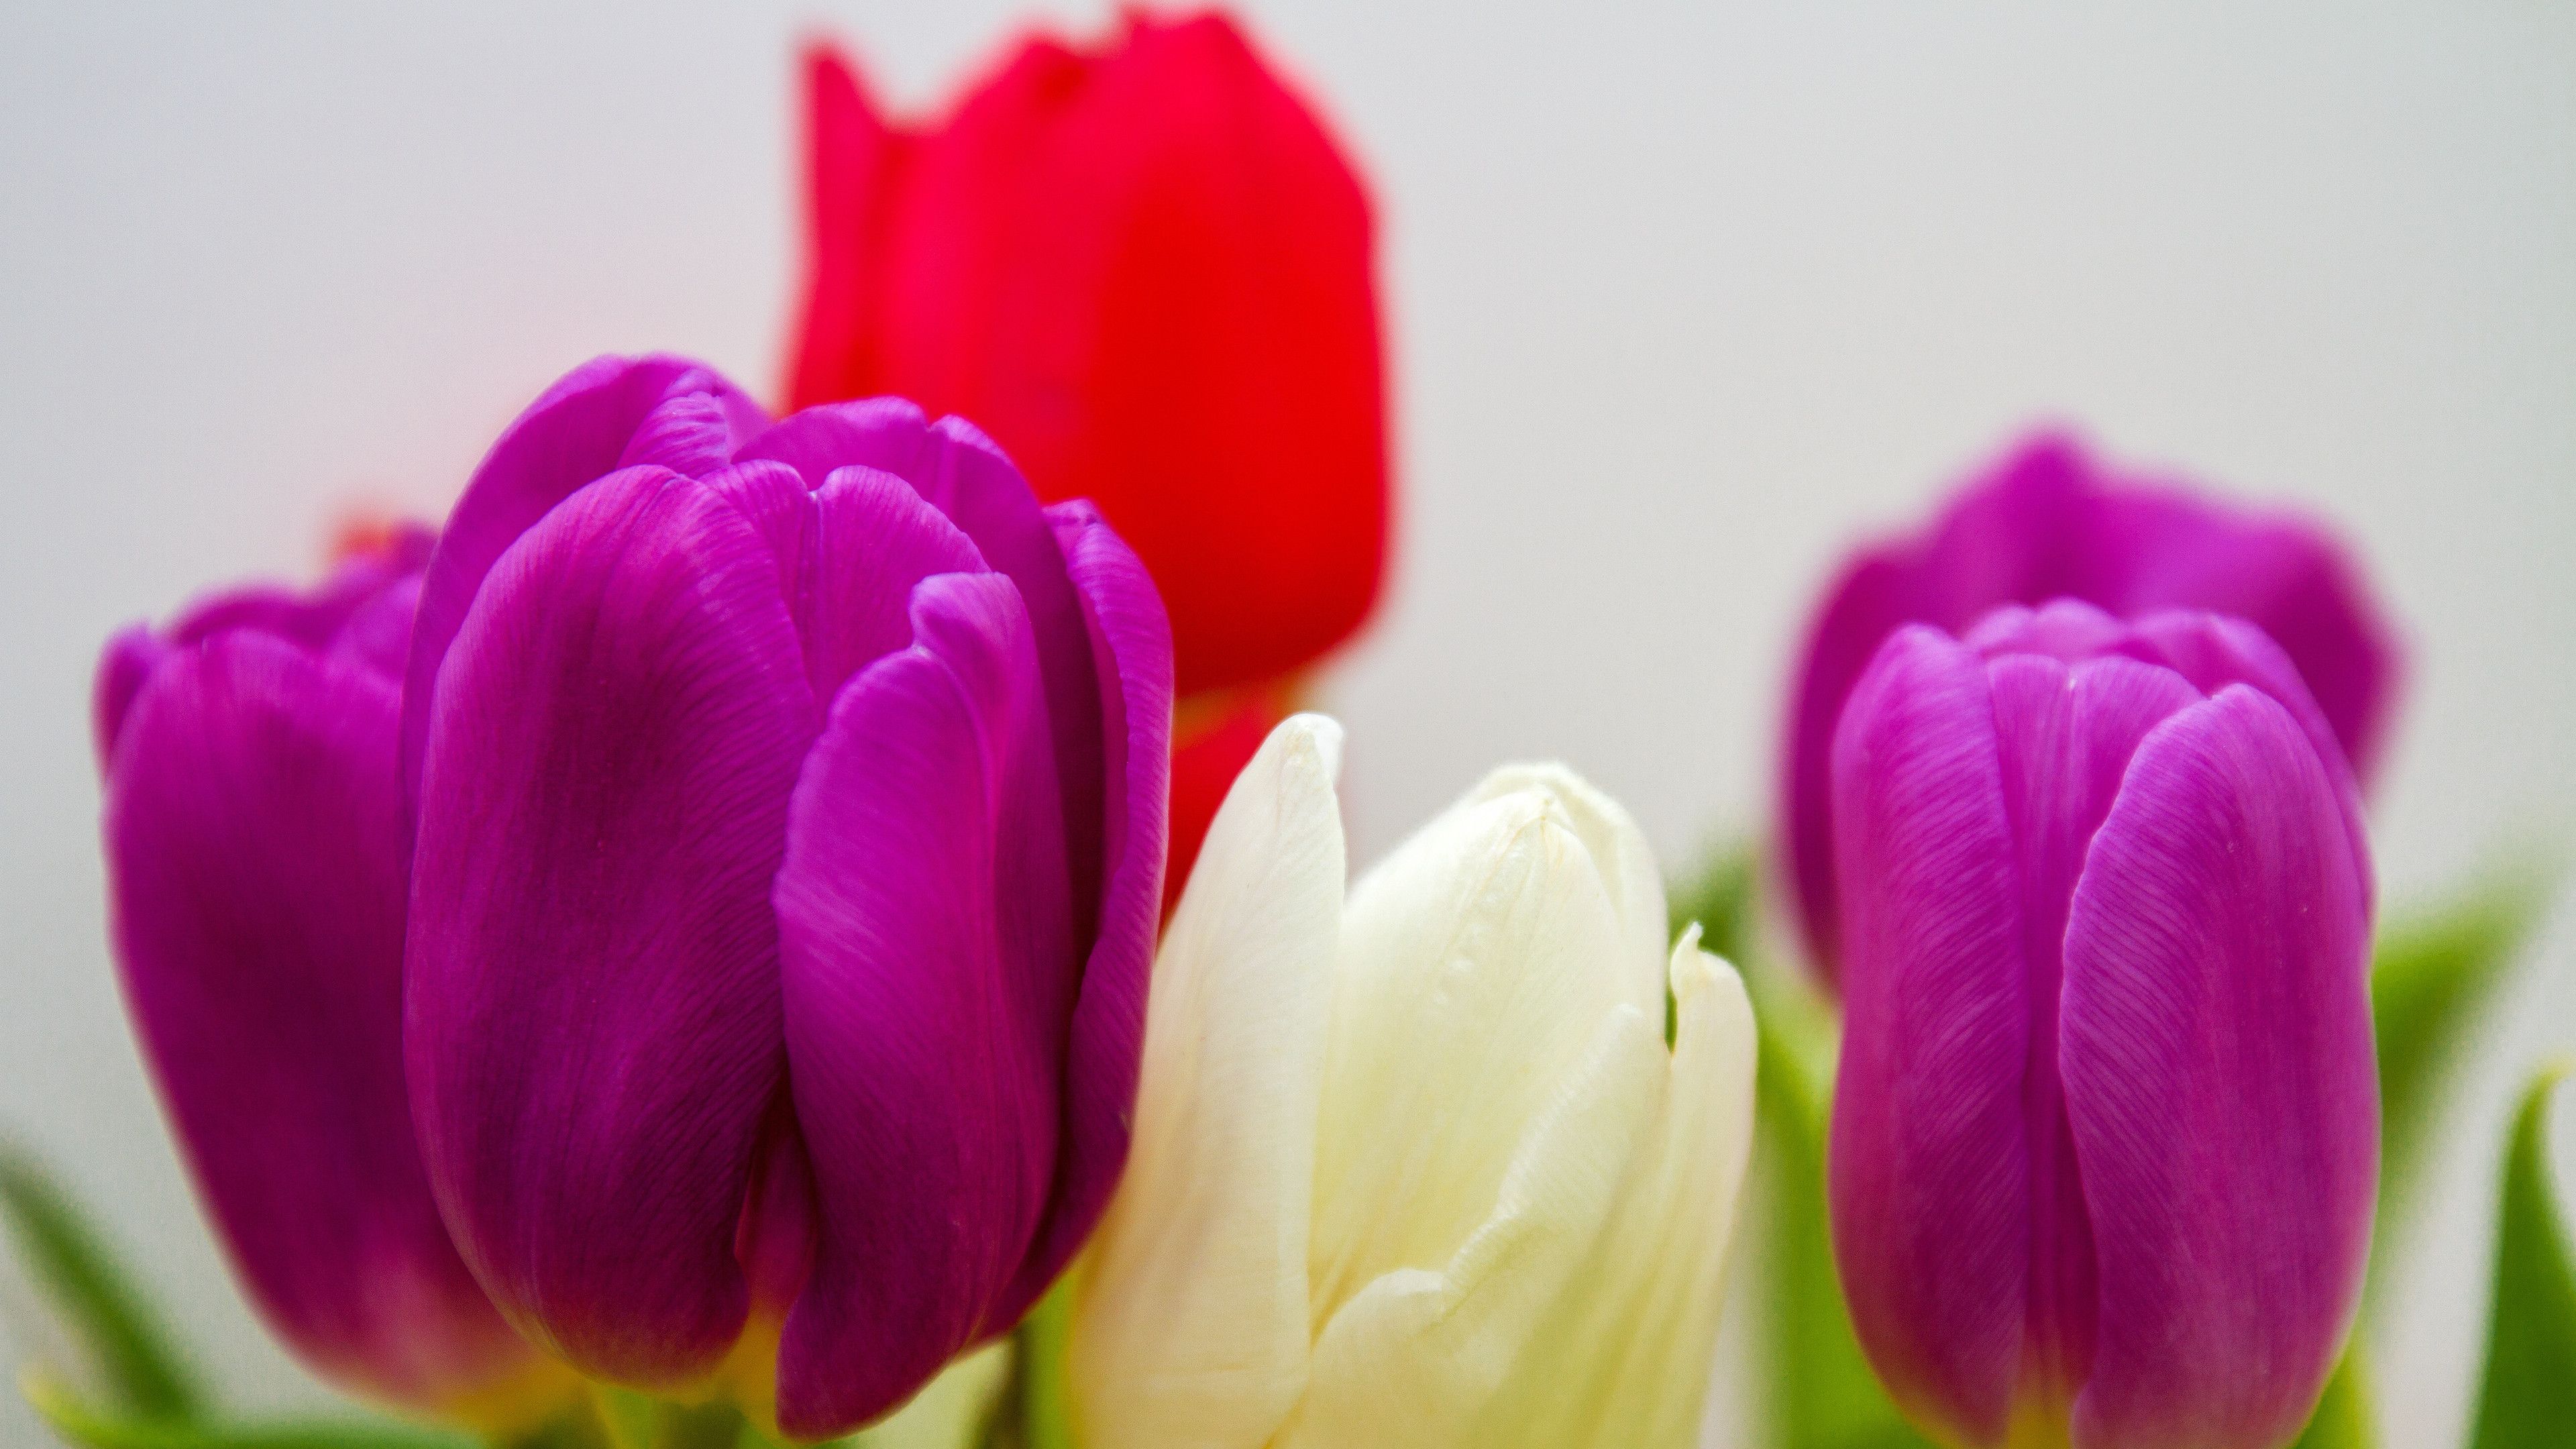 Tulip Flowers Wallpaper background picture